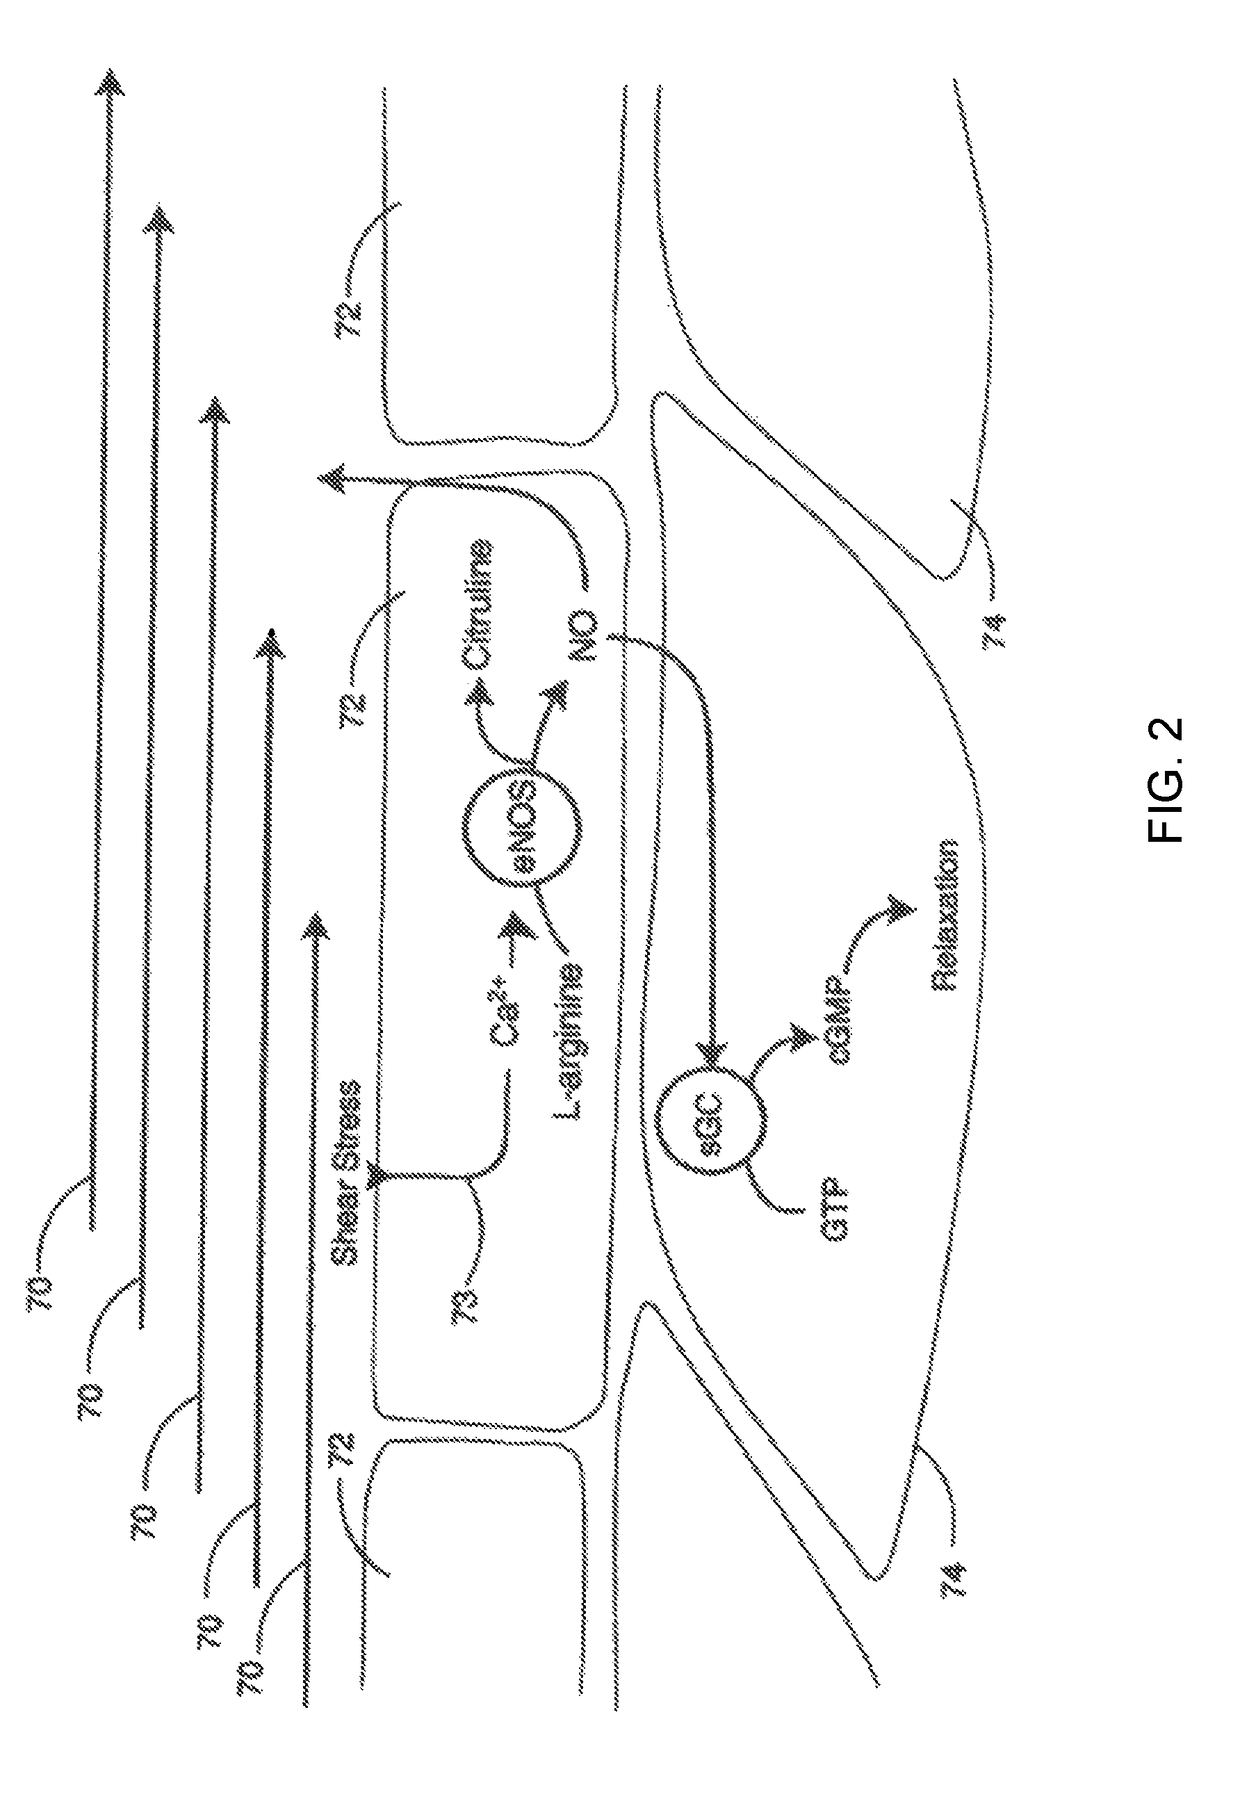 Method to treat vascular dysfunction through enhanced vascular flow and hemodynamic activation of the autocrine and paracrine processes